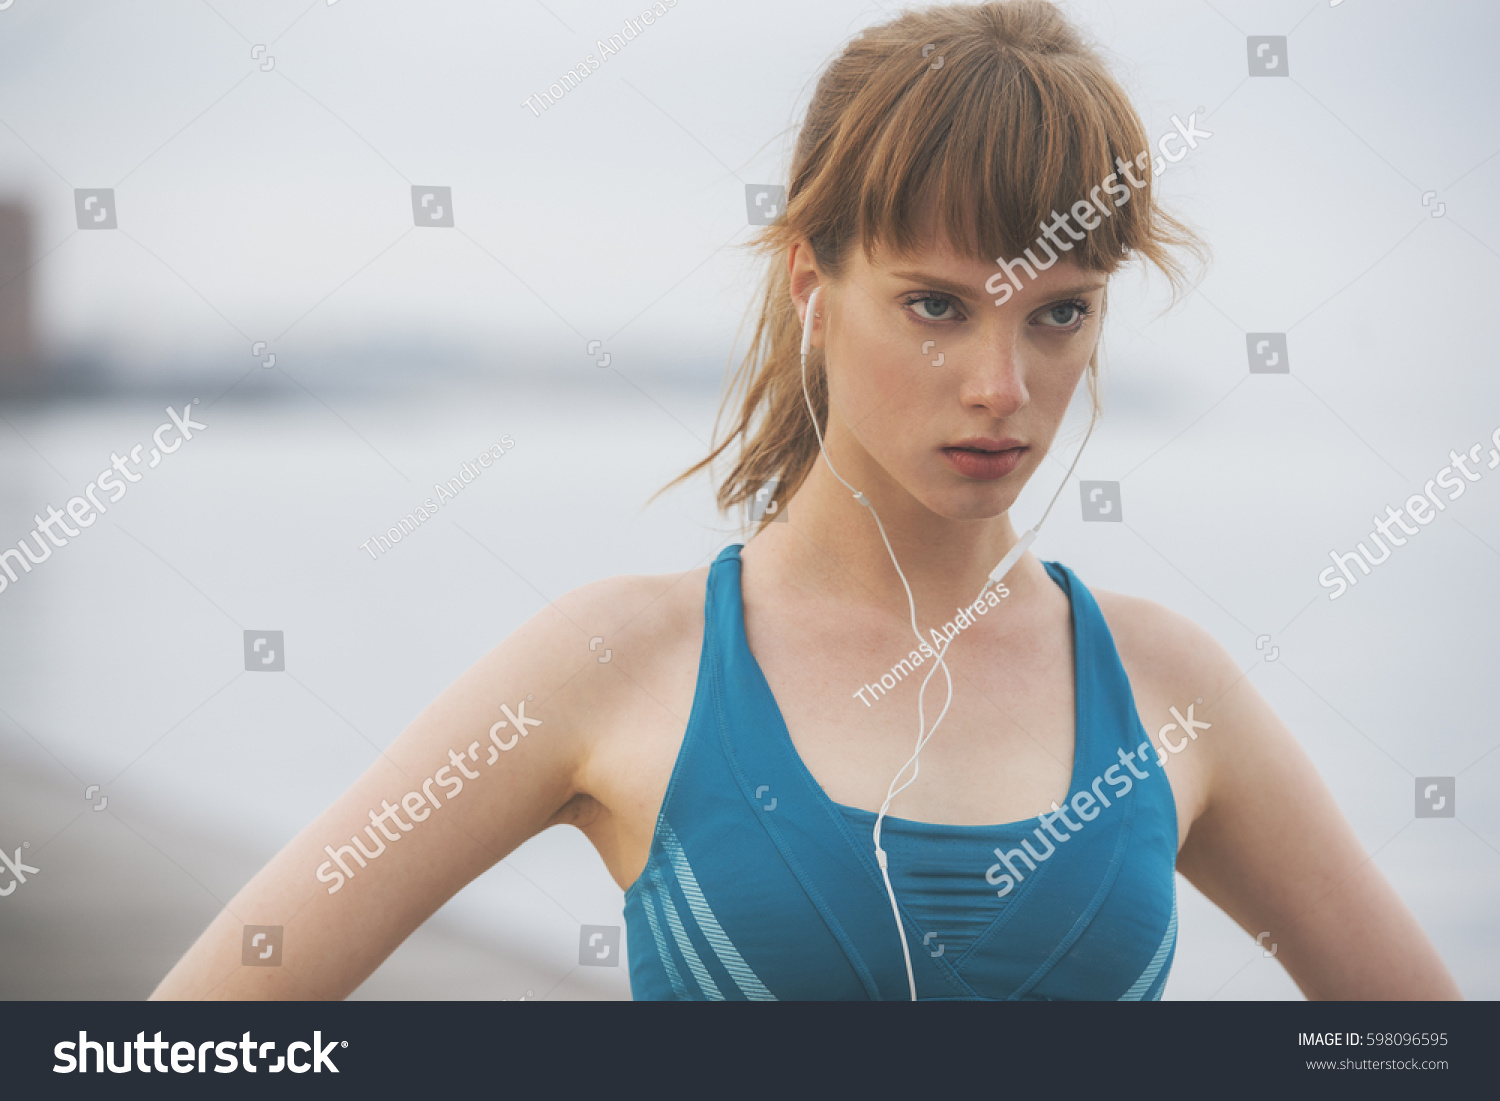 close up of a determined woman athlete running by the seaside in urban city environment #598096595